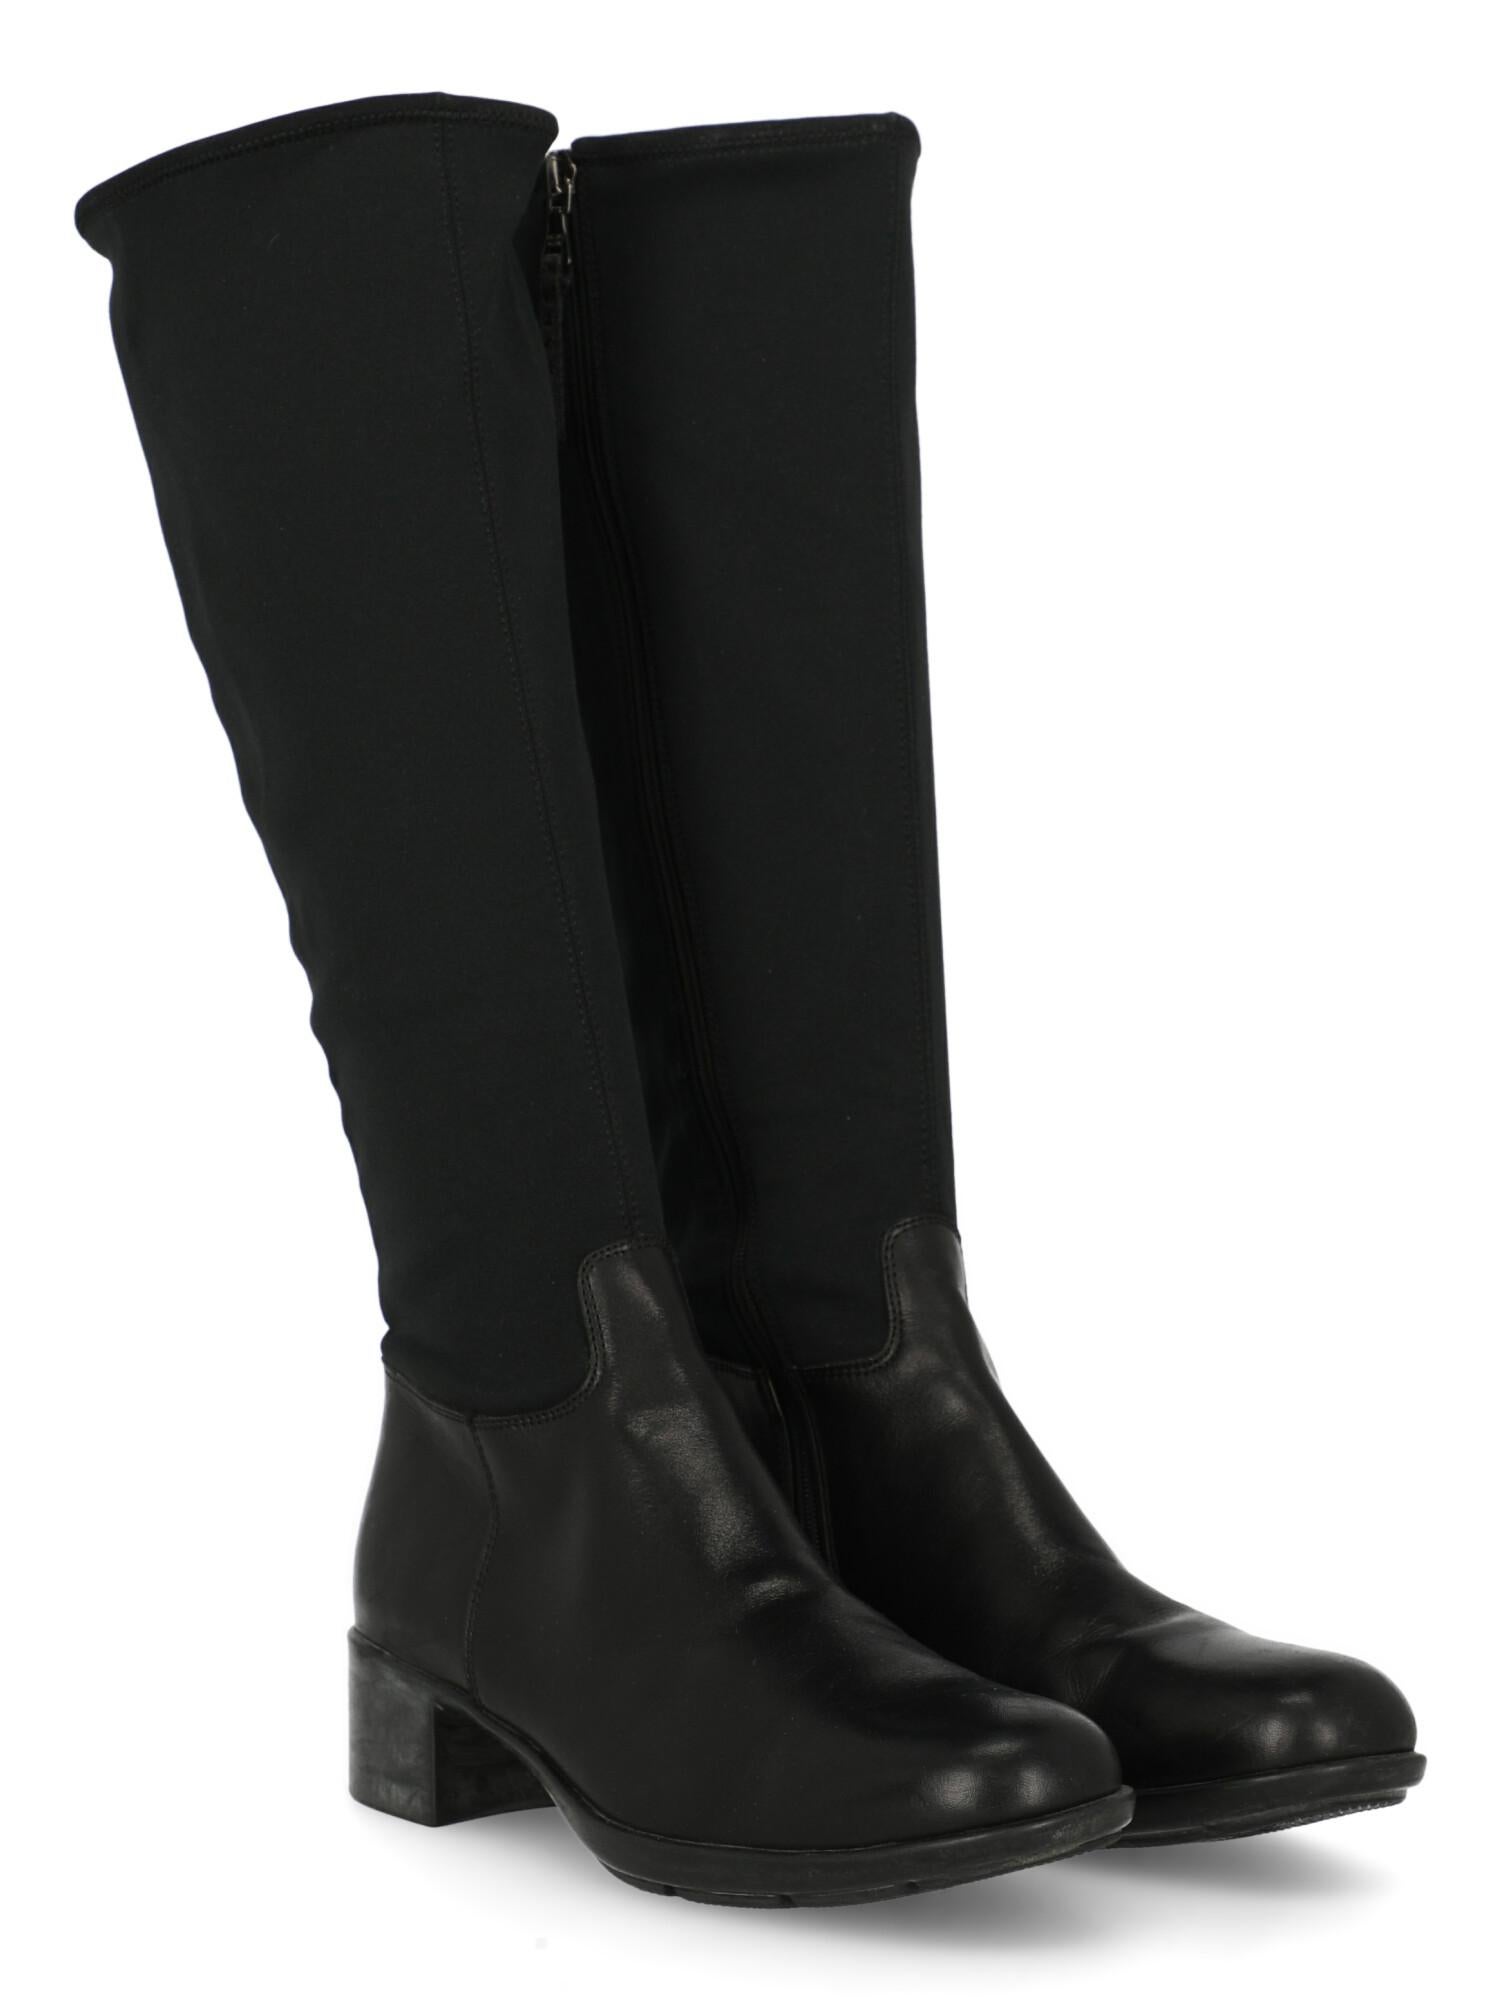 Boots, fabric, solid color, back logo, side fastening, silver-tone hardware, round toe, block heel, low and flat heel.

Includes:
- Dust bag

Product Condition: Very Good
Heel: slightly visible marks. Sole: visible signs of use. Upper: visible